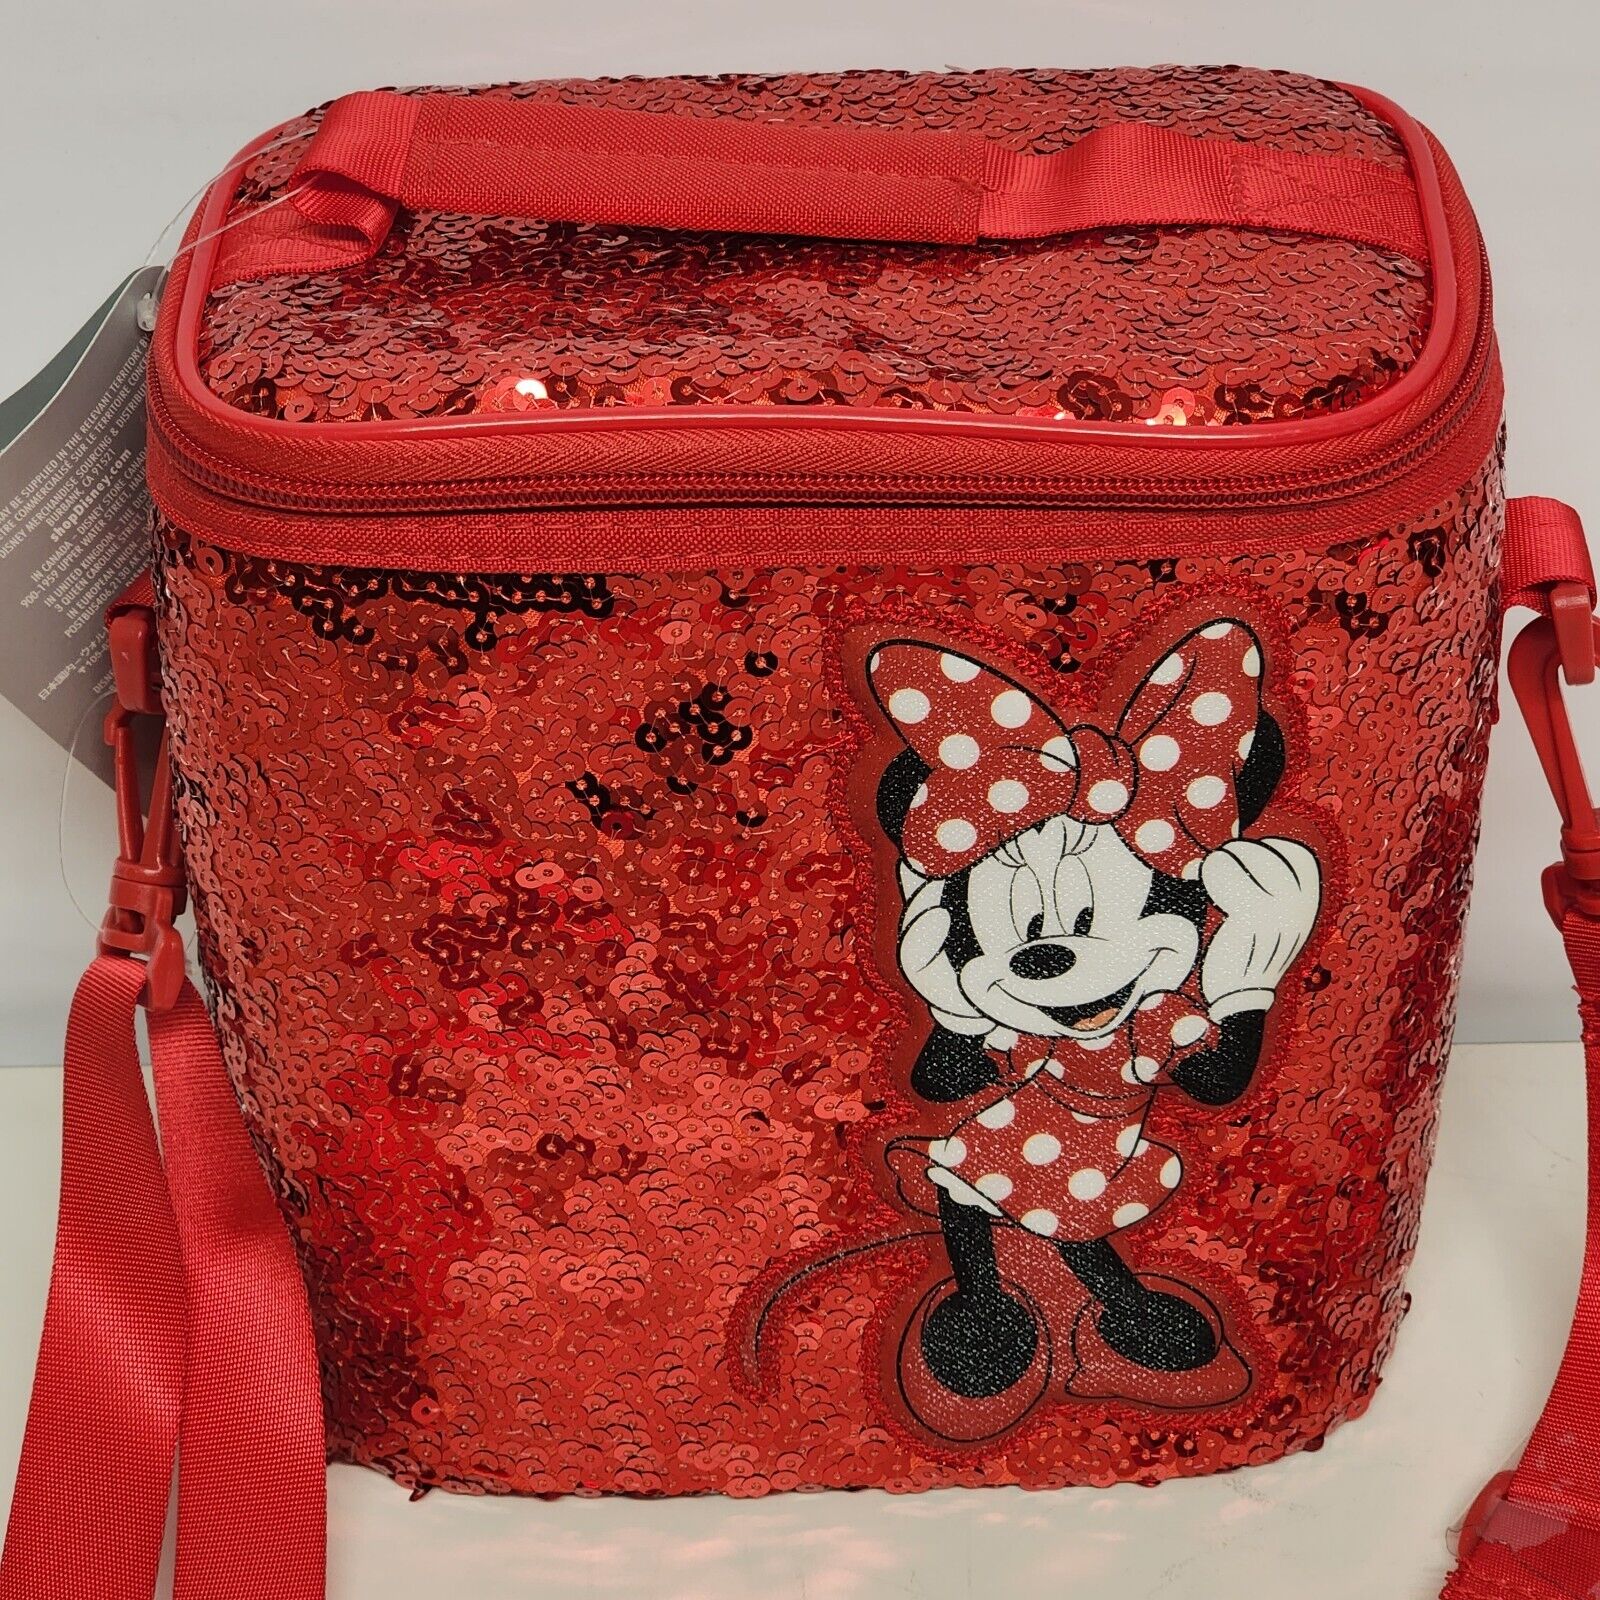 New Disney Store Minnie Mouse Red Sequin Shoulder Strap Lunch Box Insulated Tote